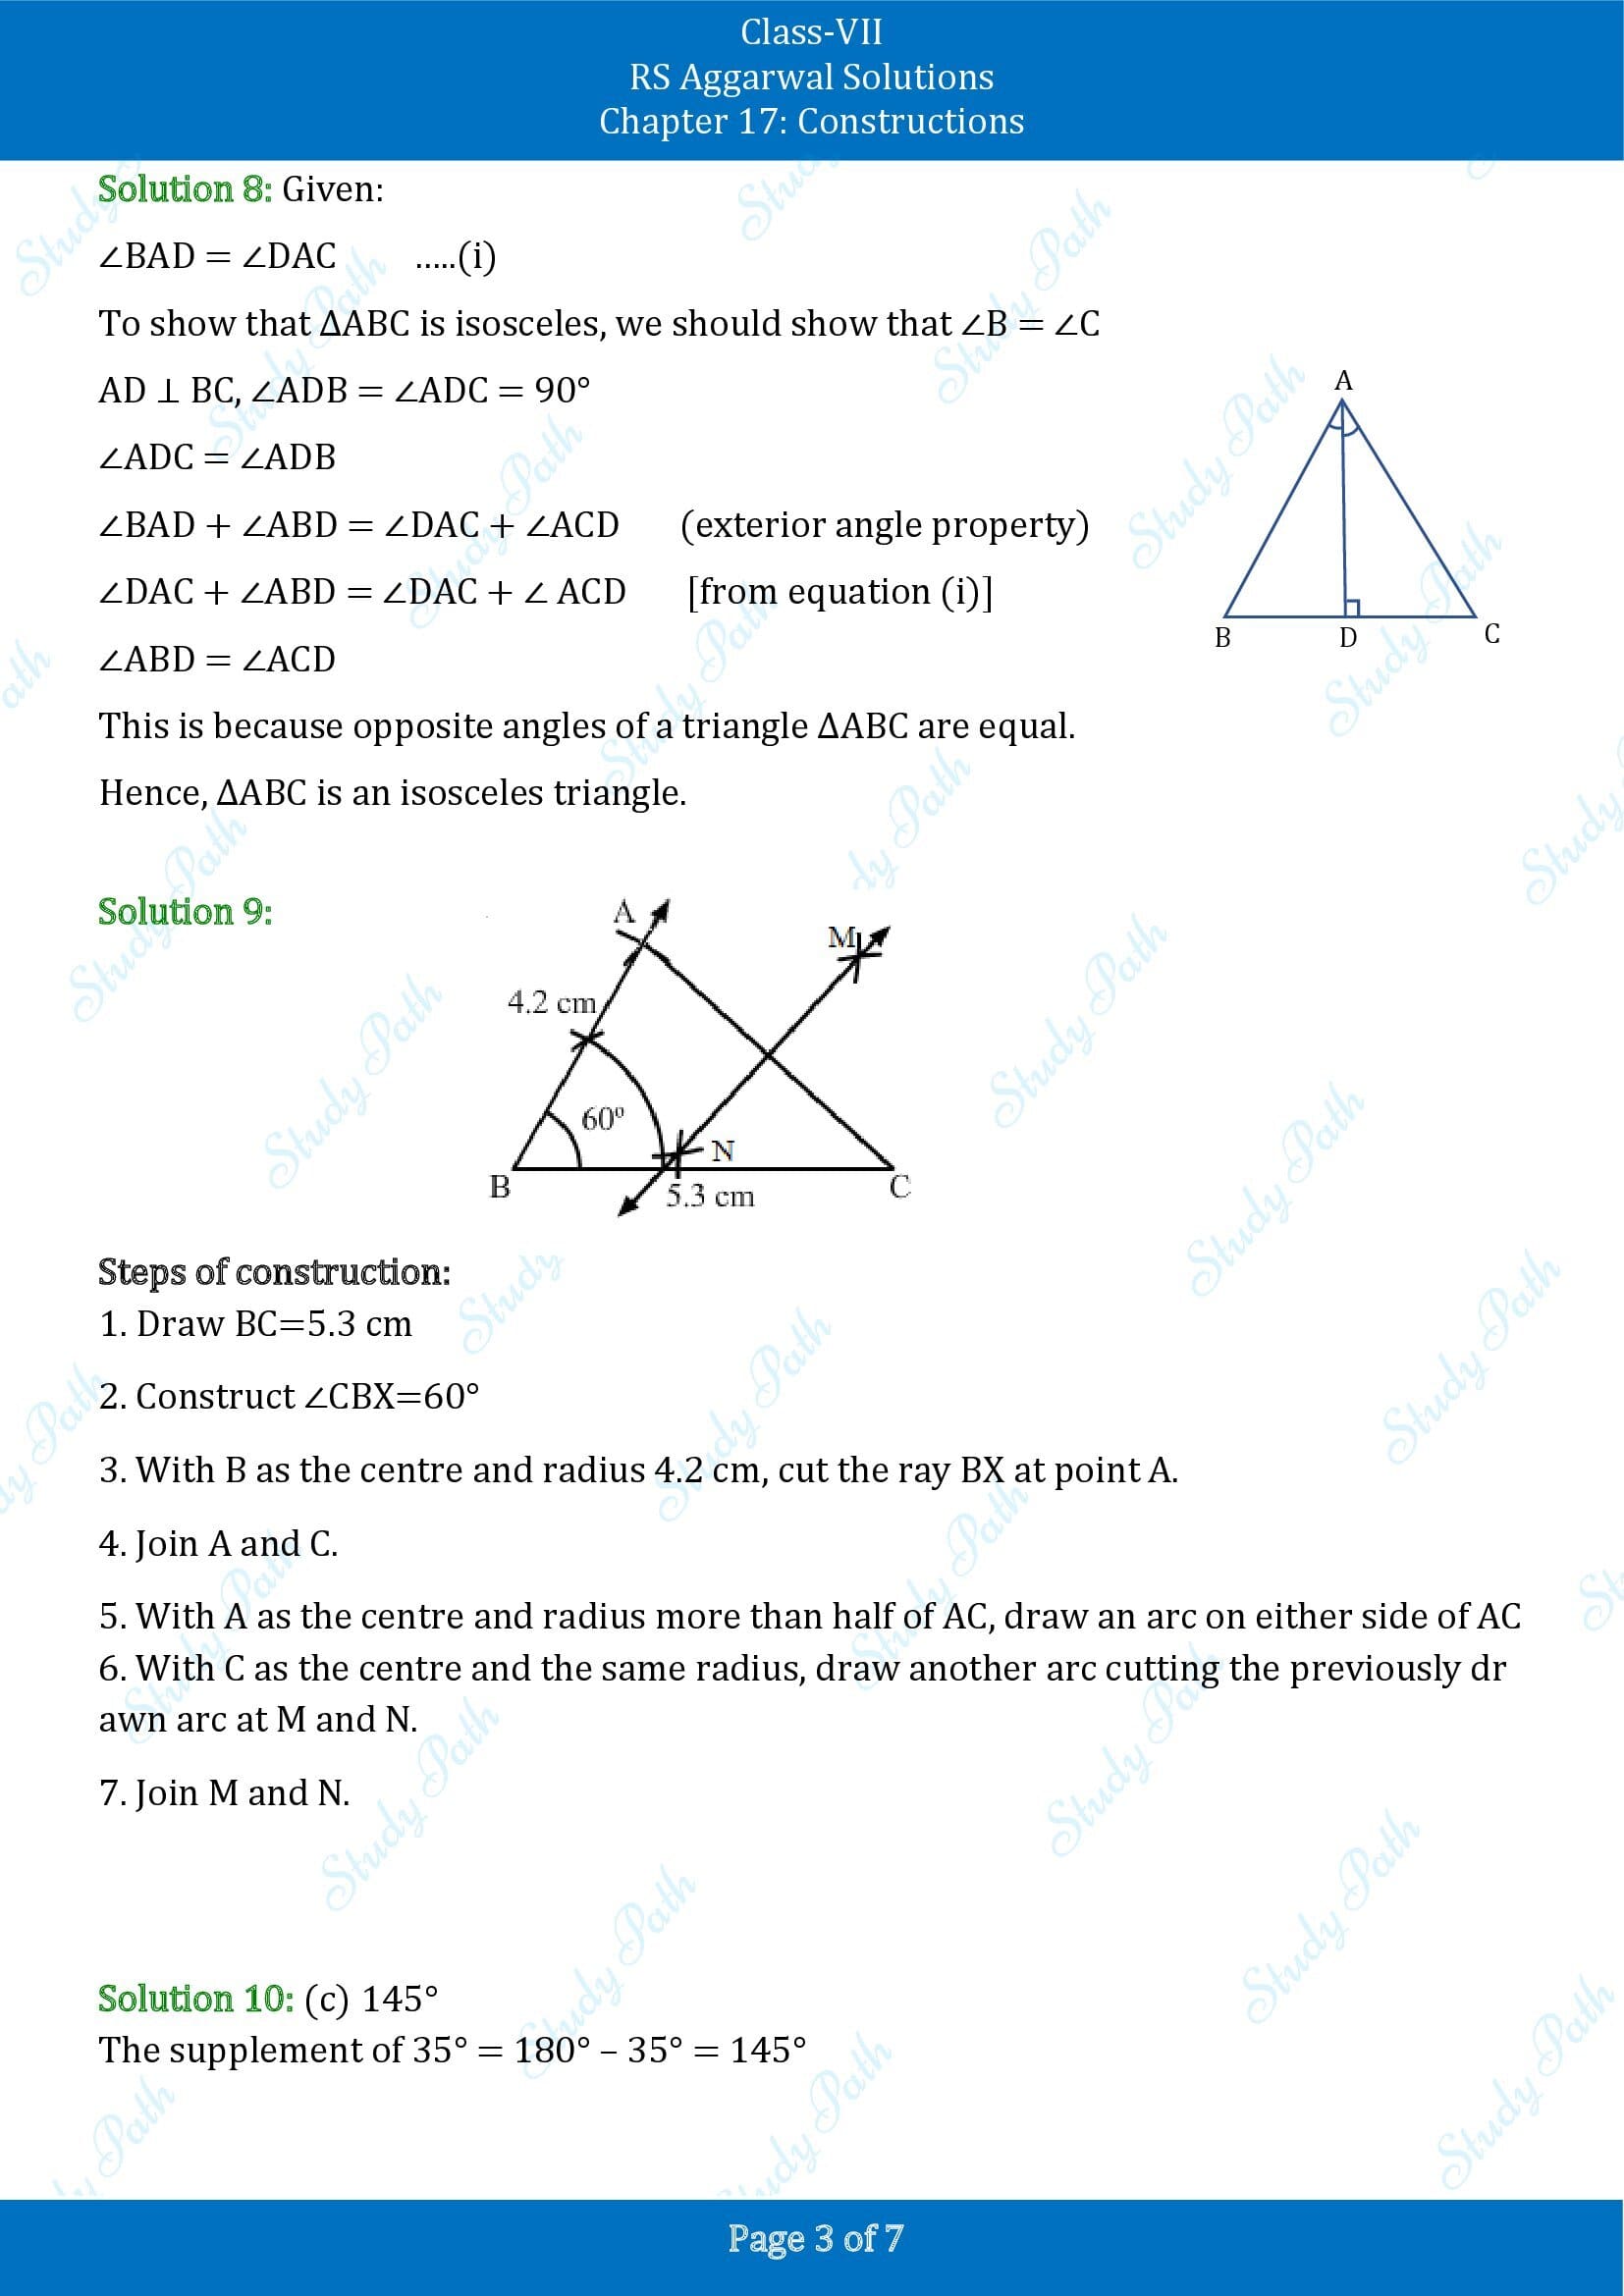 RS Aggarwal Solutions Class 7 Chapter 17 Constructions Test Paper 00003